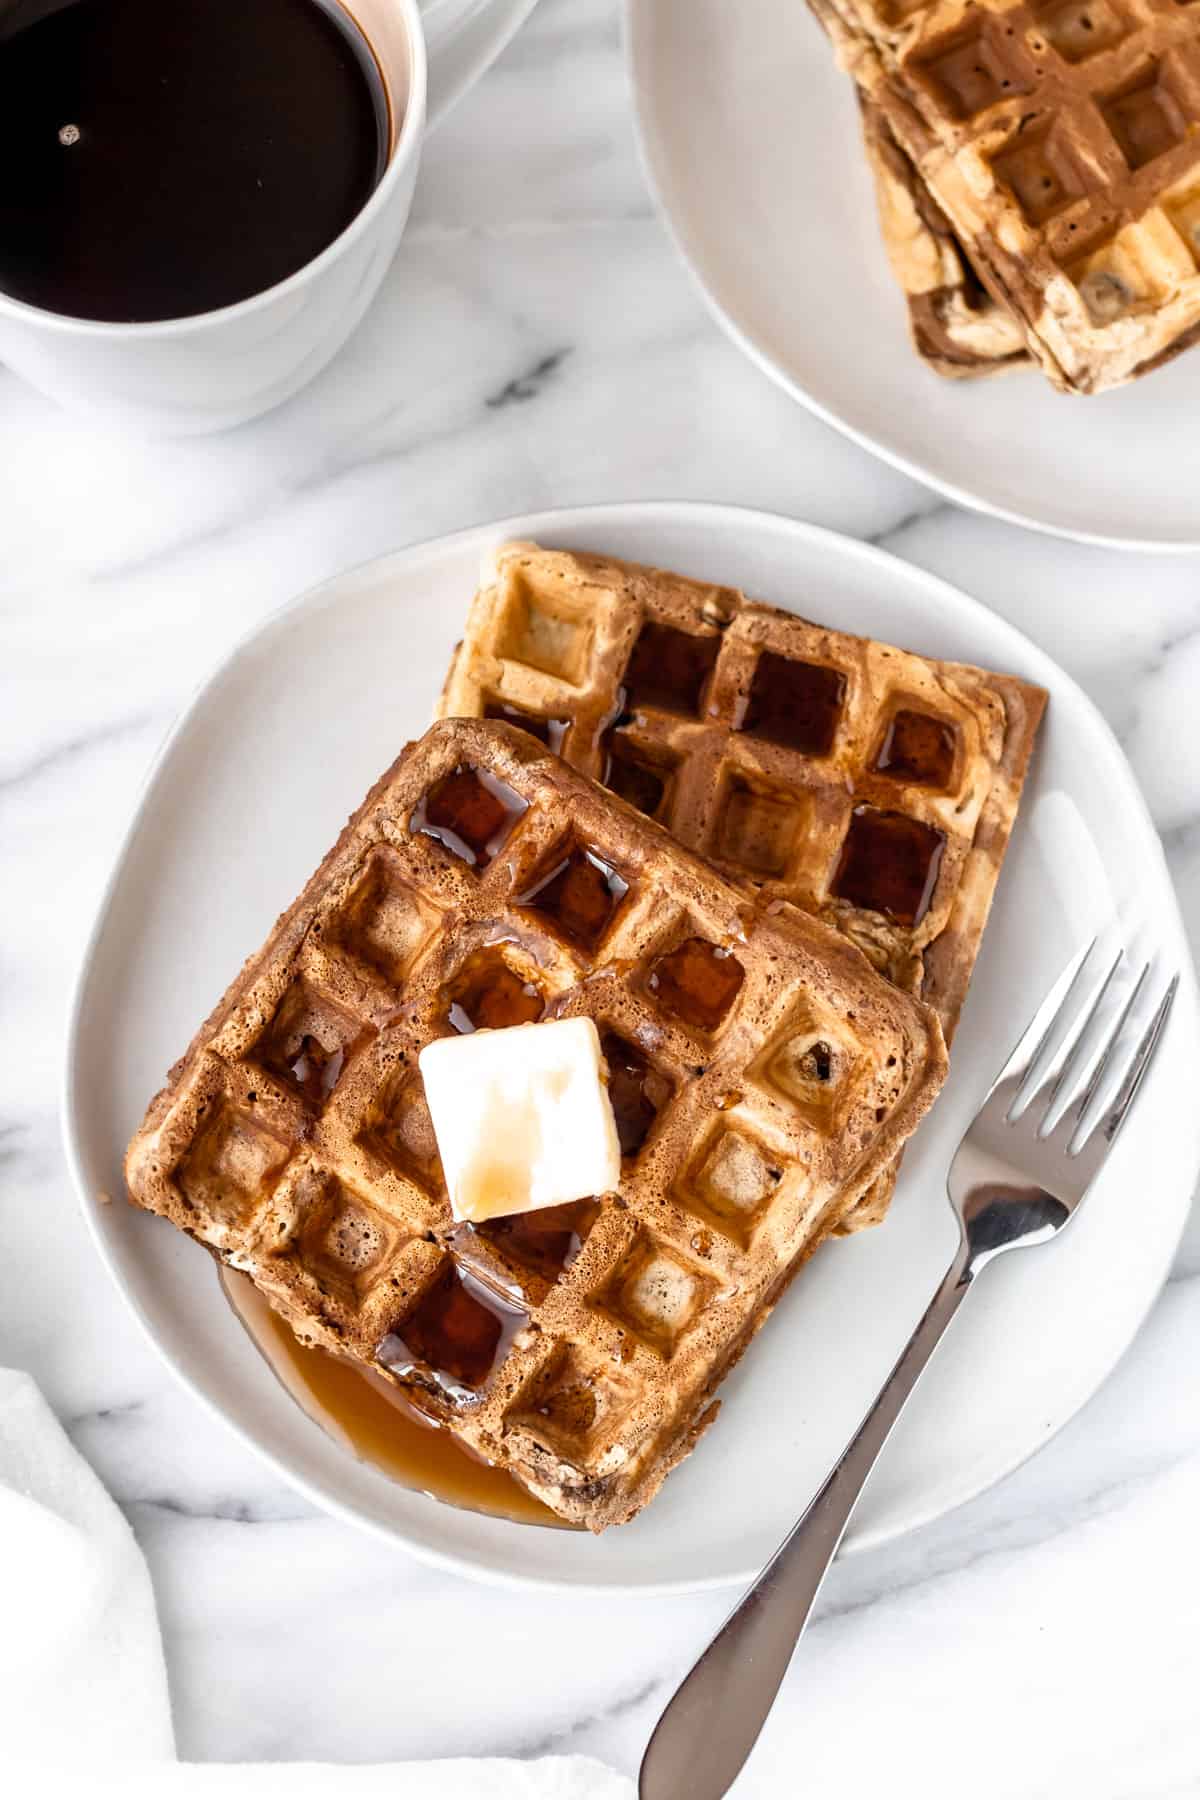 Overhead of peanut butter and chocolate swirled waffles on a plate with a second plate partially showing and a cup of coffee.